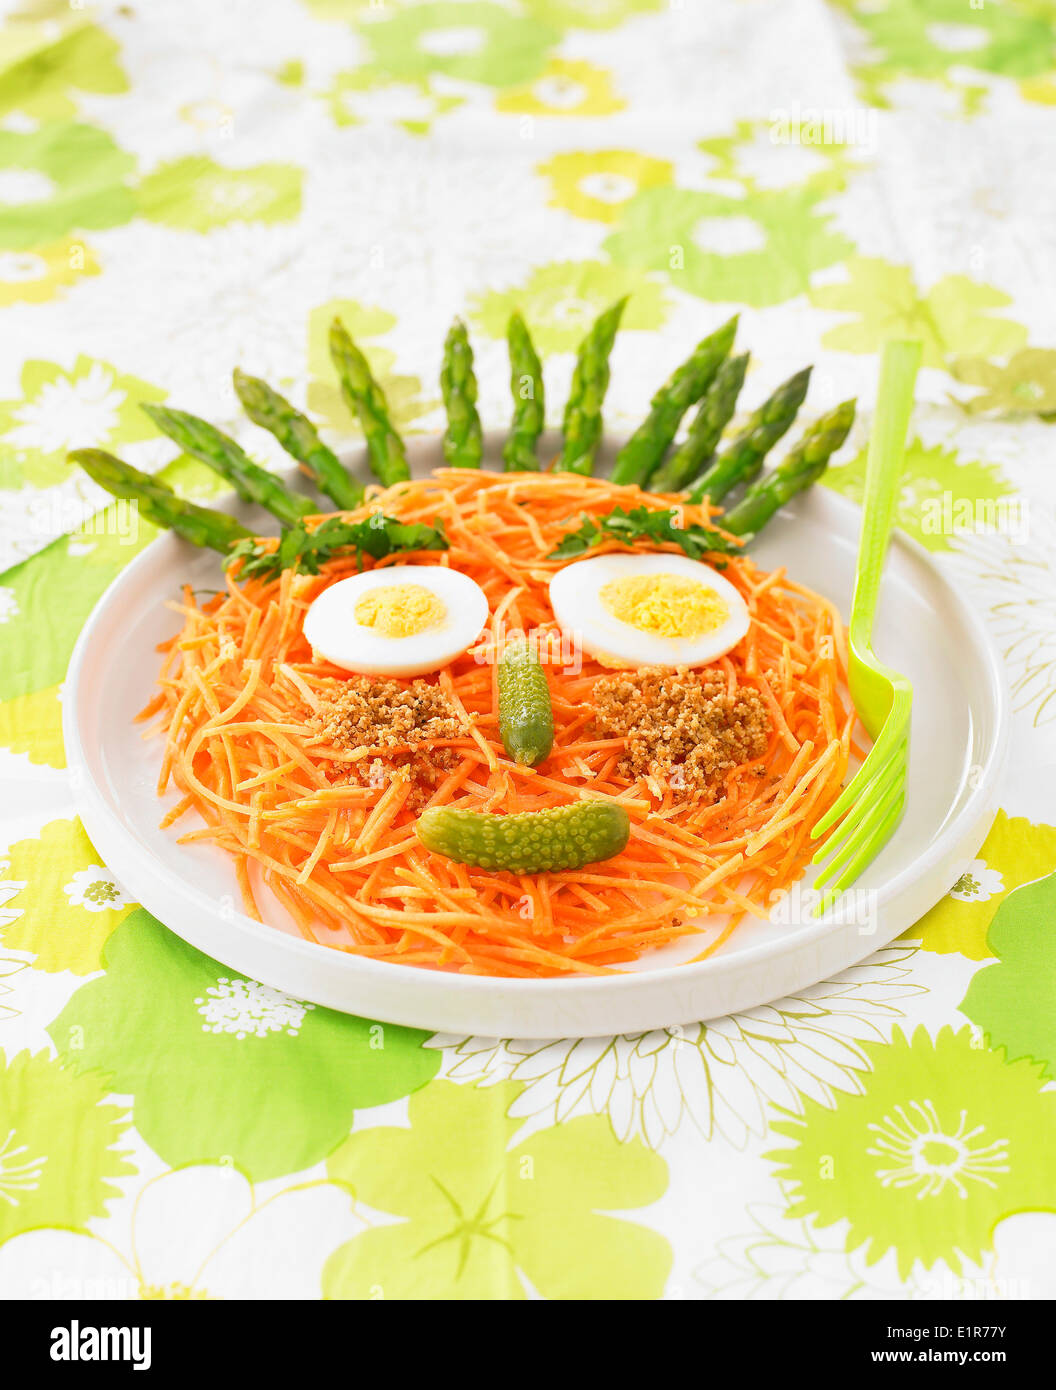 Face-shaped grated carrot and asparagus salad Stock Photo